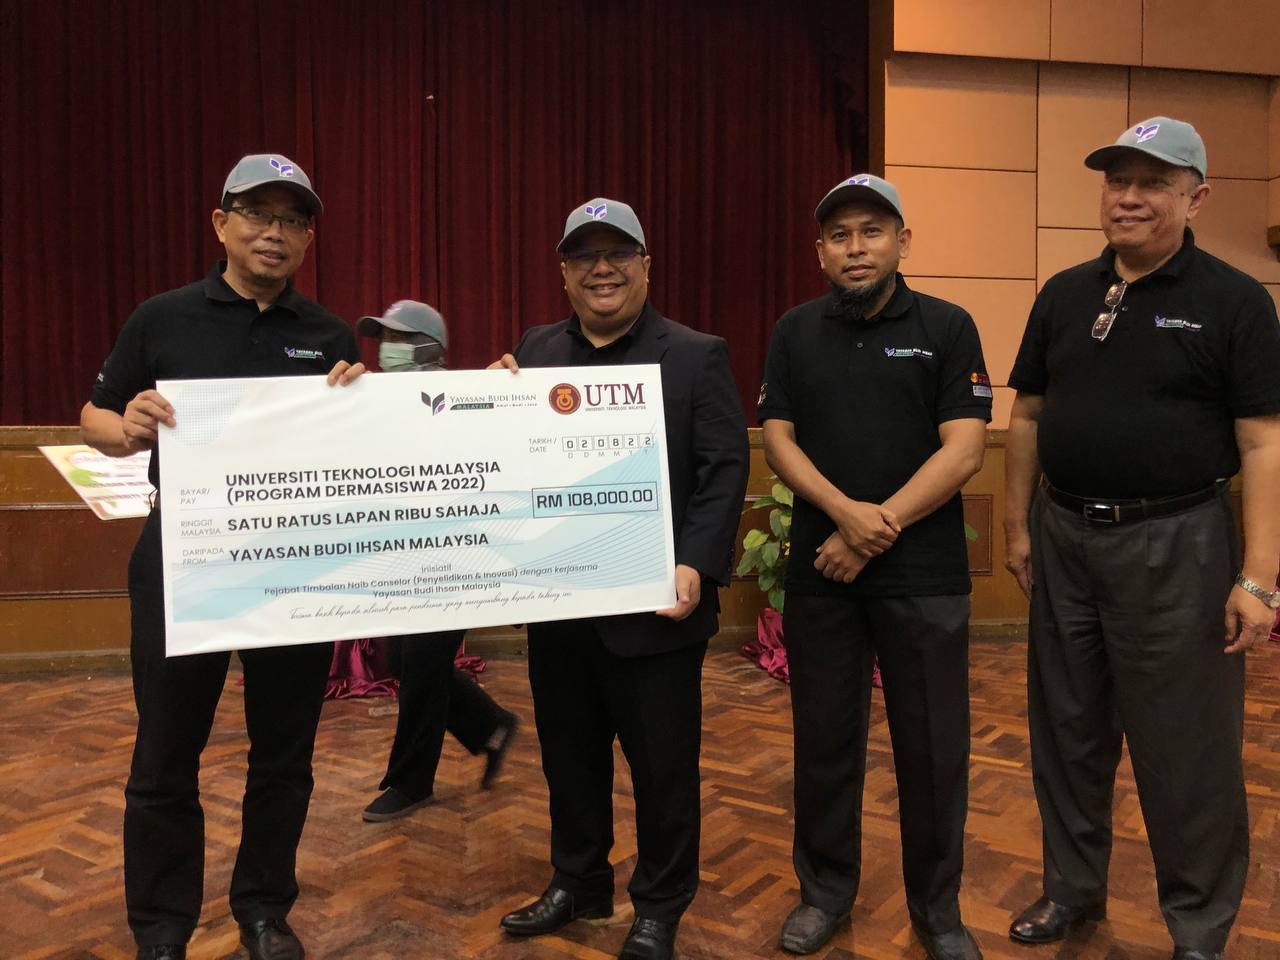 You are currently viewing Inauguration Ceremony of the Frozen Meat Distribution Program of the 1001 Asnaf Qurbani and Bursary Program 2022 organized by YBIM and Universiti Teknologi Malaysia